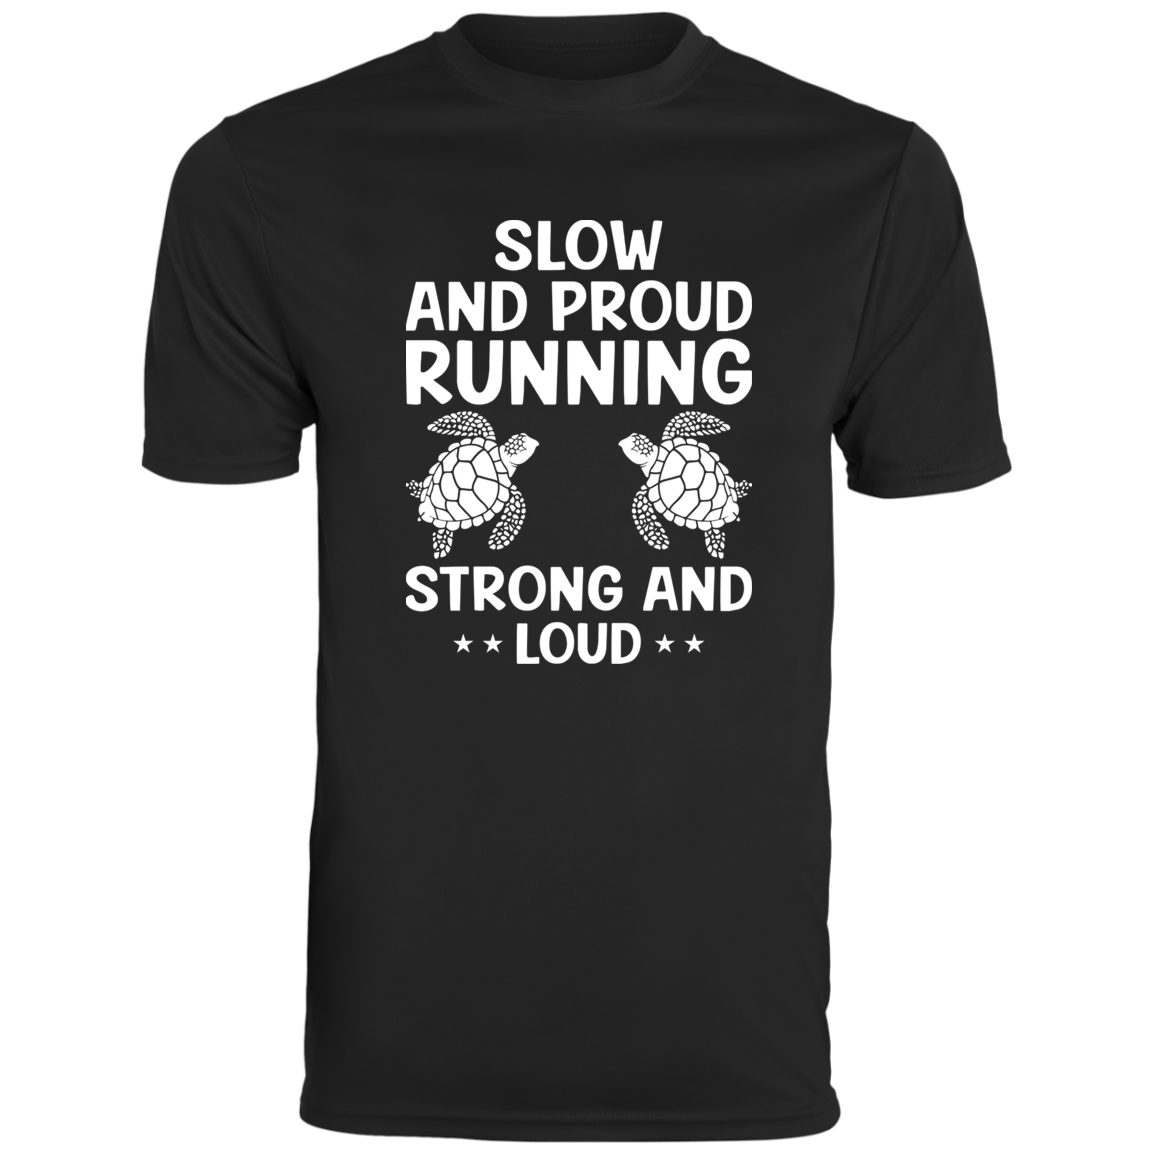 Men's Inspirational Top Slow And Proud, Running Strong And Loud